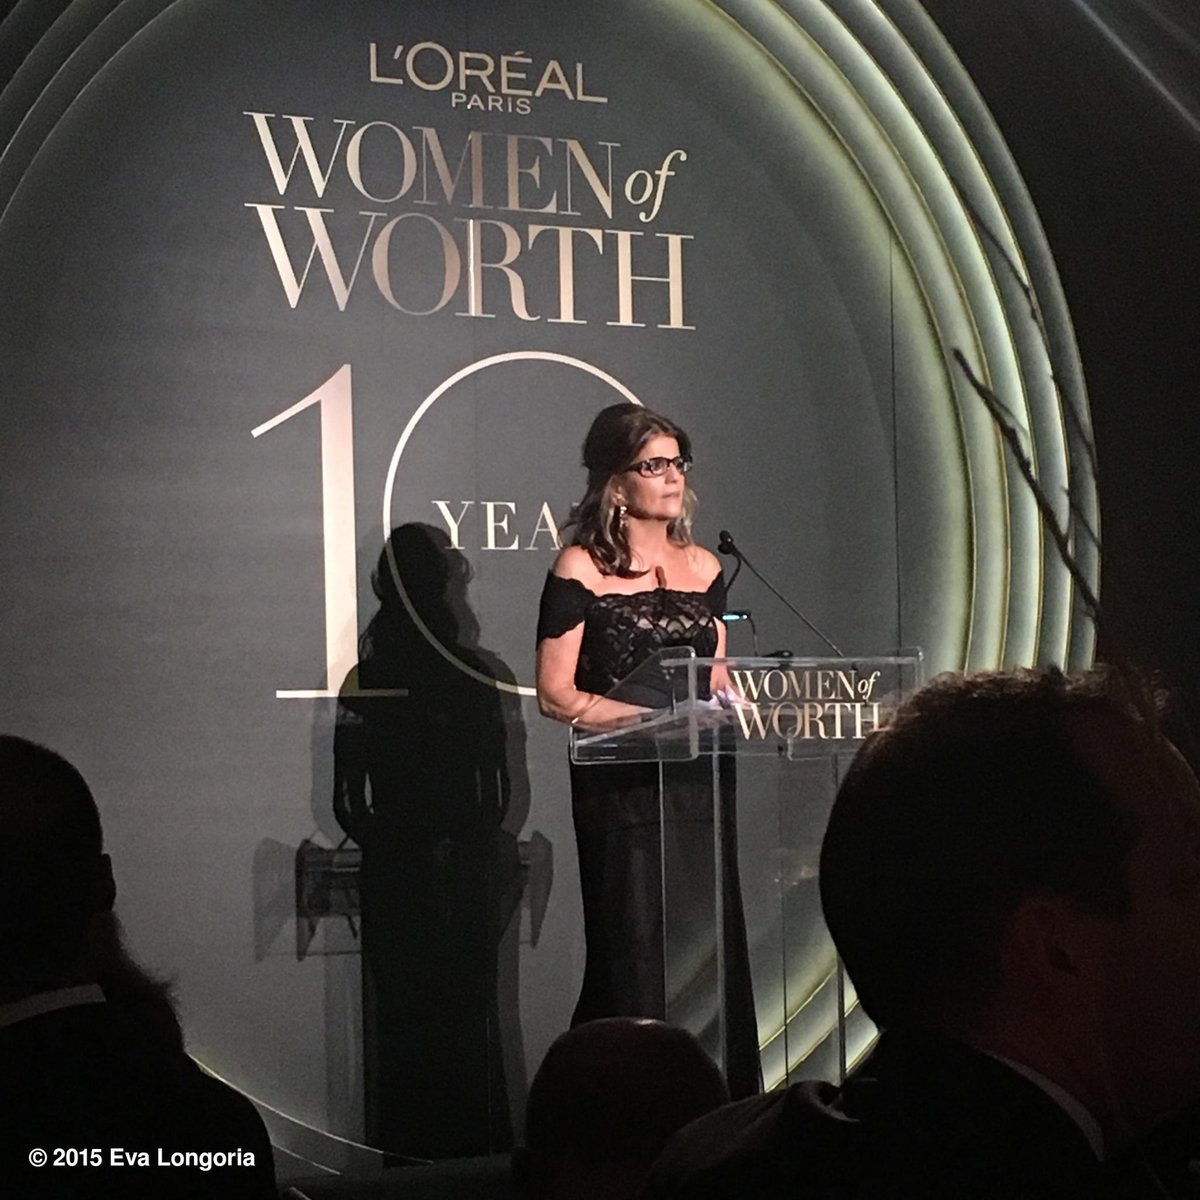 So honored to be at the 10th Anniversary of the @LorealParisUSA  #WomenofWorth #Eva4Loreal https://t.co/vvXgNjkpmE